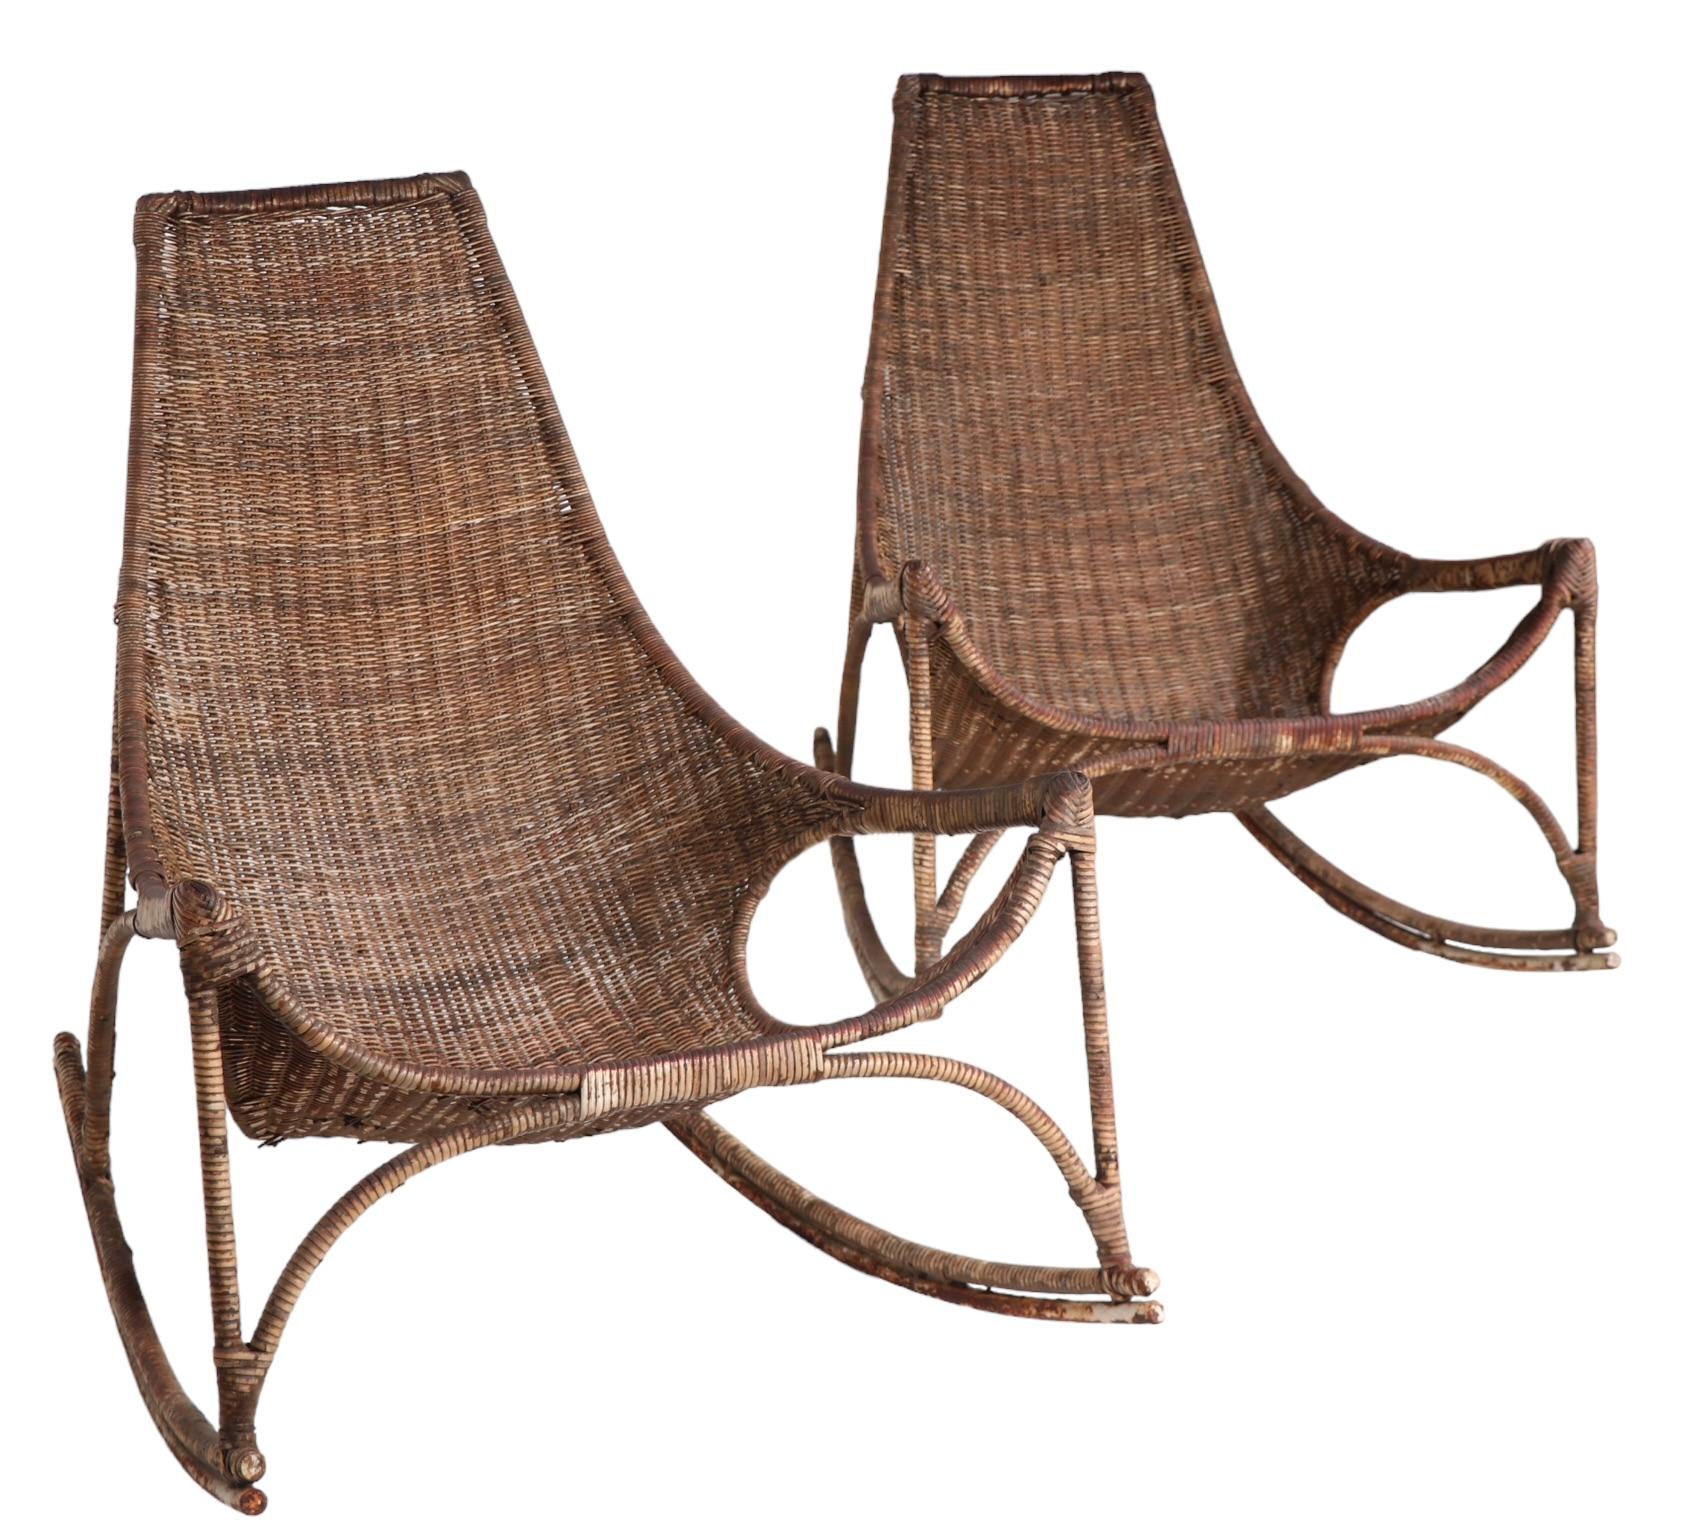 Pr. Wicker Rocking Chairs by Francis Mair c 1950/1960's For Sale 2